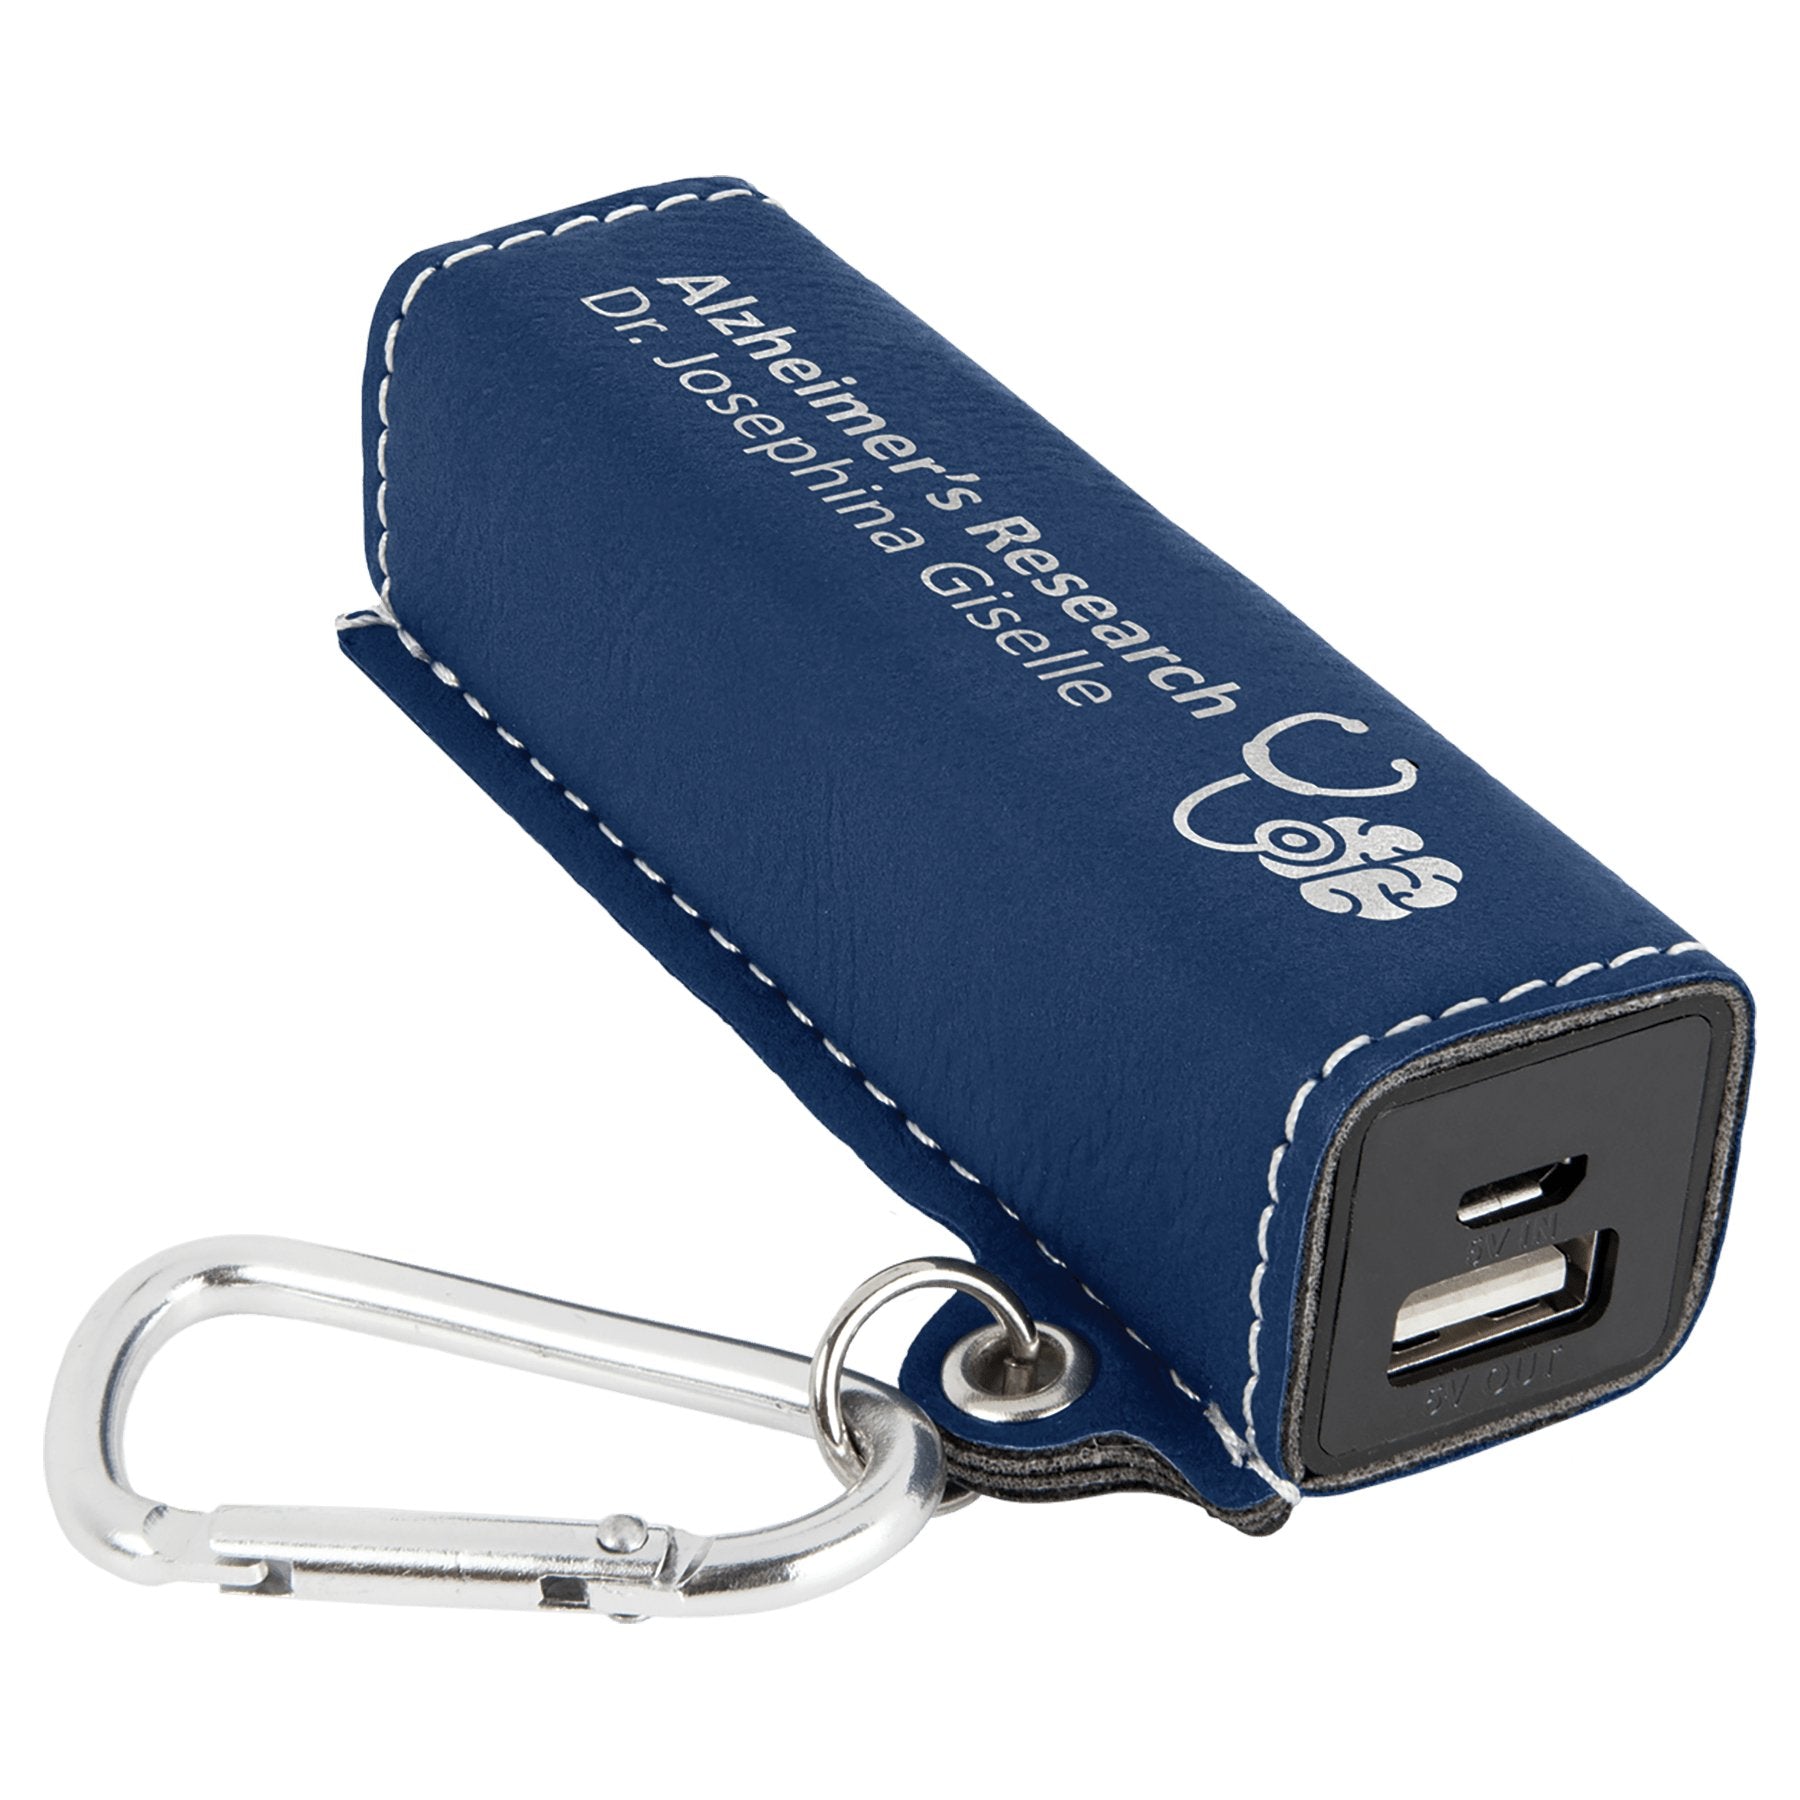 Laserable Leatherette 2200 mAh Power Bank with USB Cord - Legacy Creator IncBlue/Silver